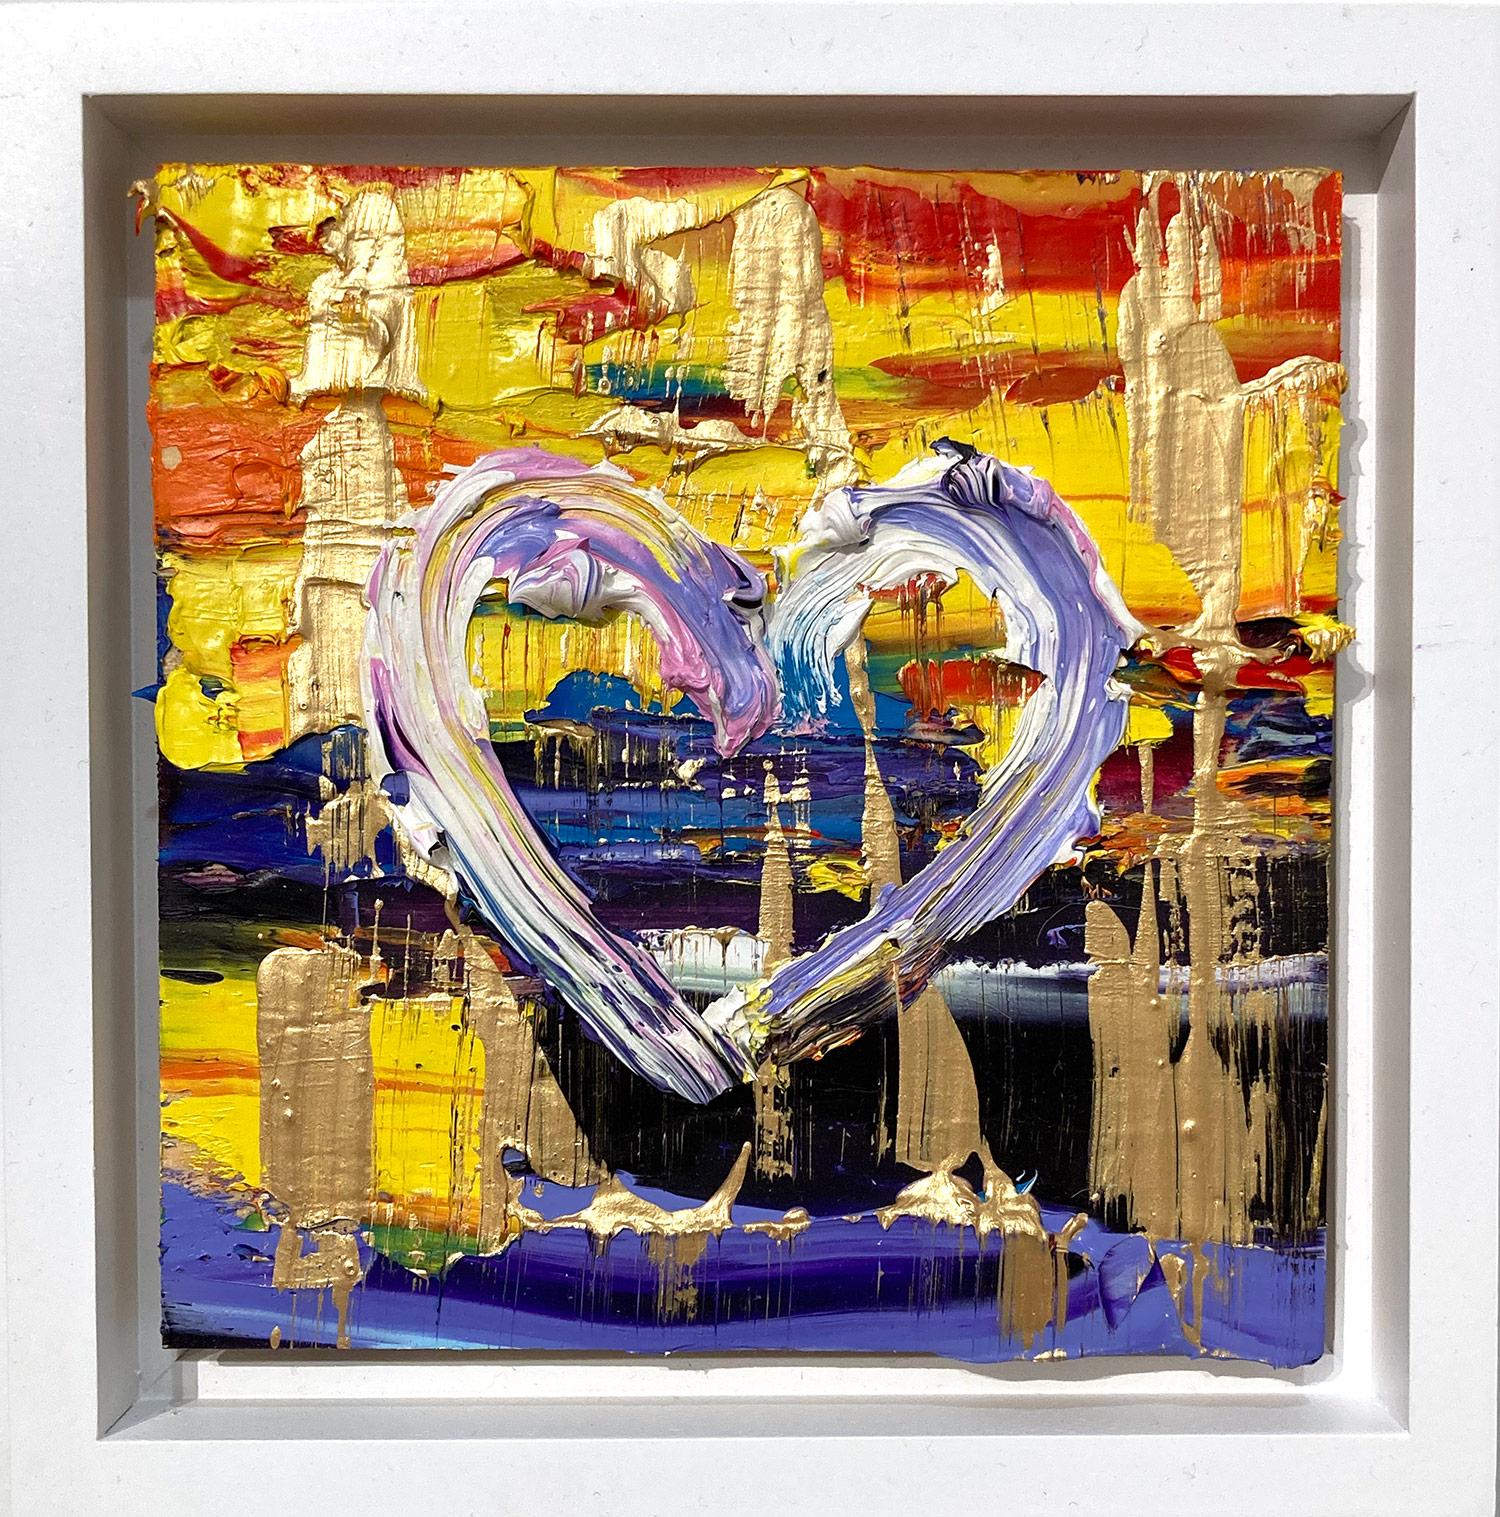 Cindy Shaoul Figurative Painting - "My Tequila Sunrise Heart" Colorful Abstract Oil Painting with Floater Frame